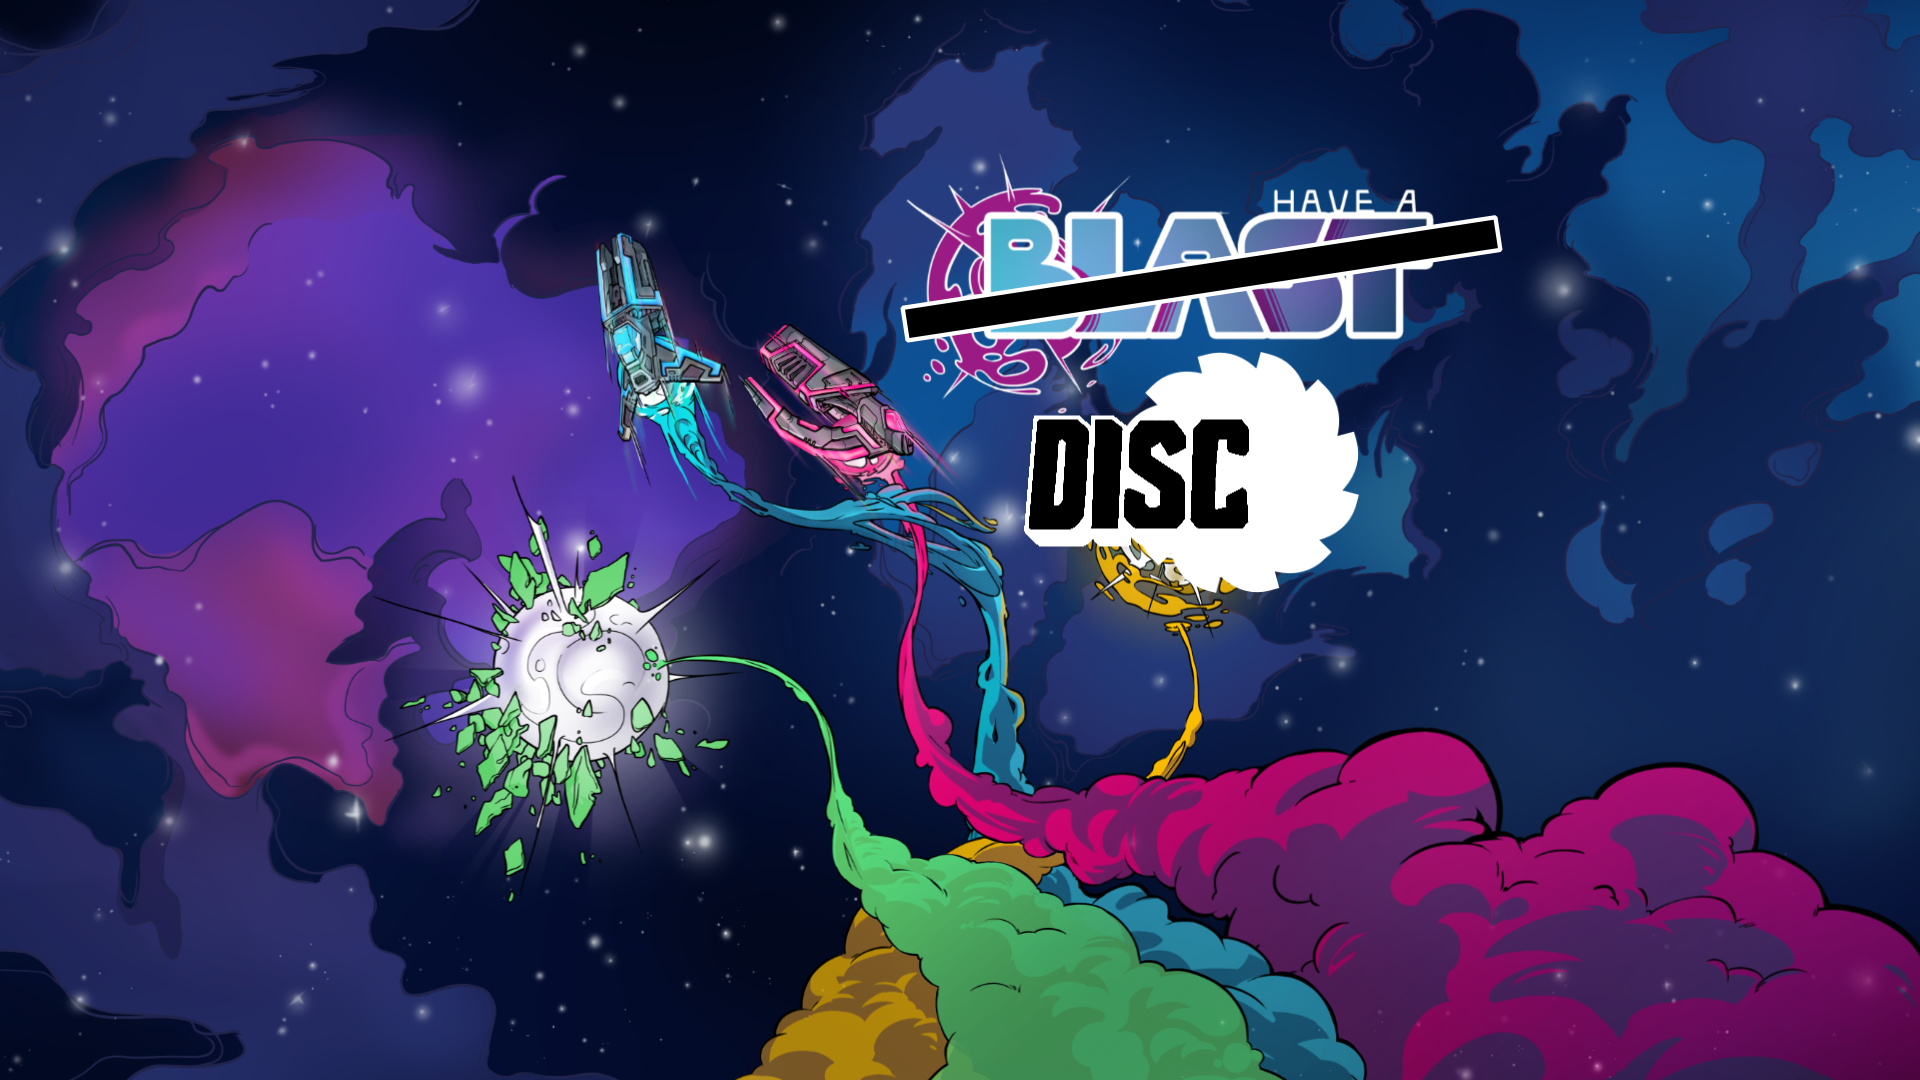 Have a Disc